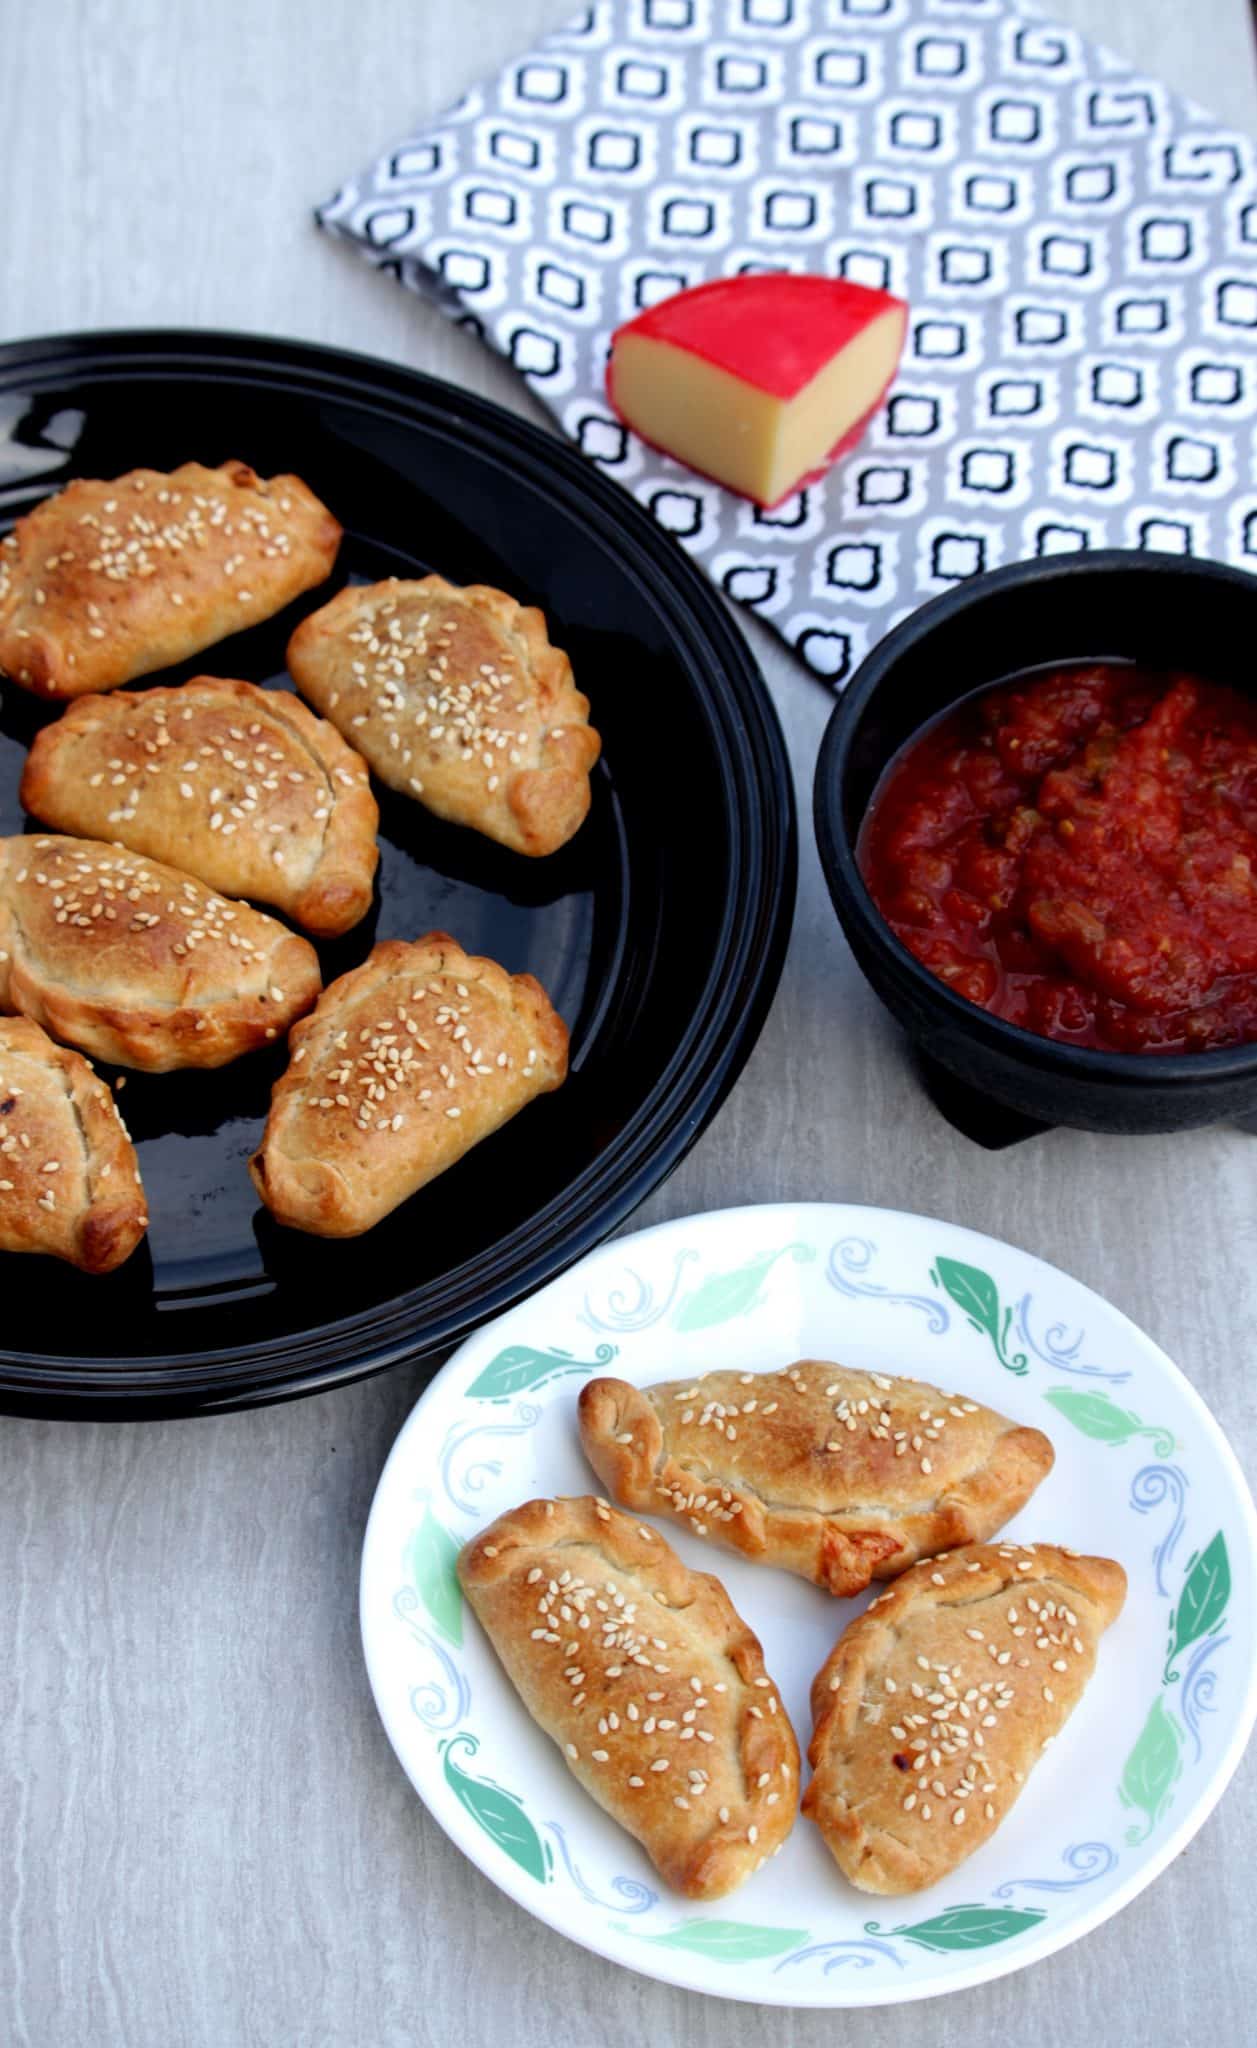 Onion and cheese empanadas in a plates with salsa on the side